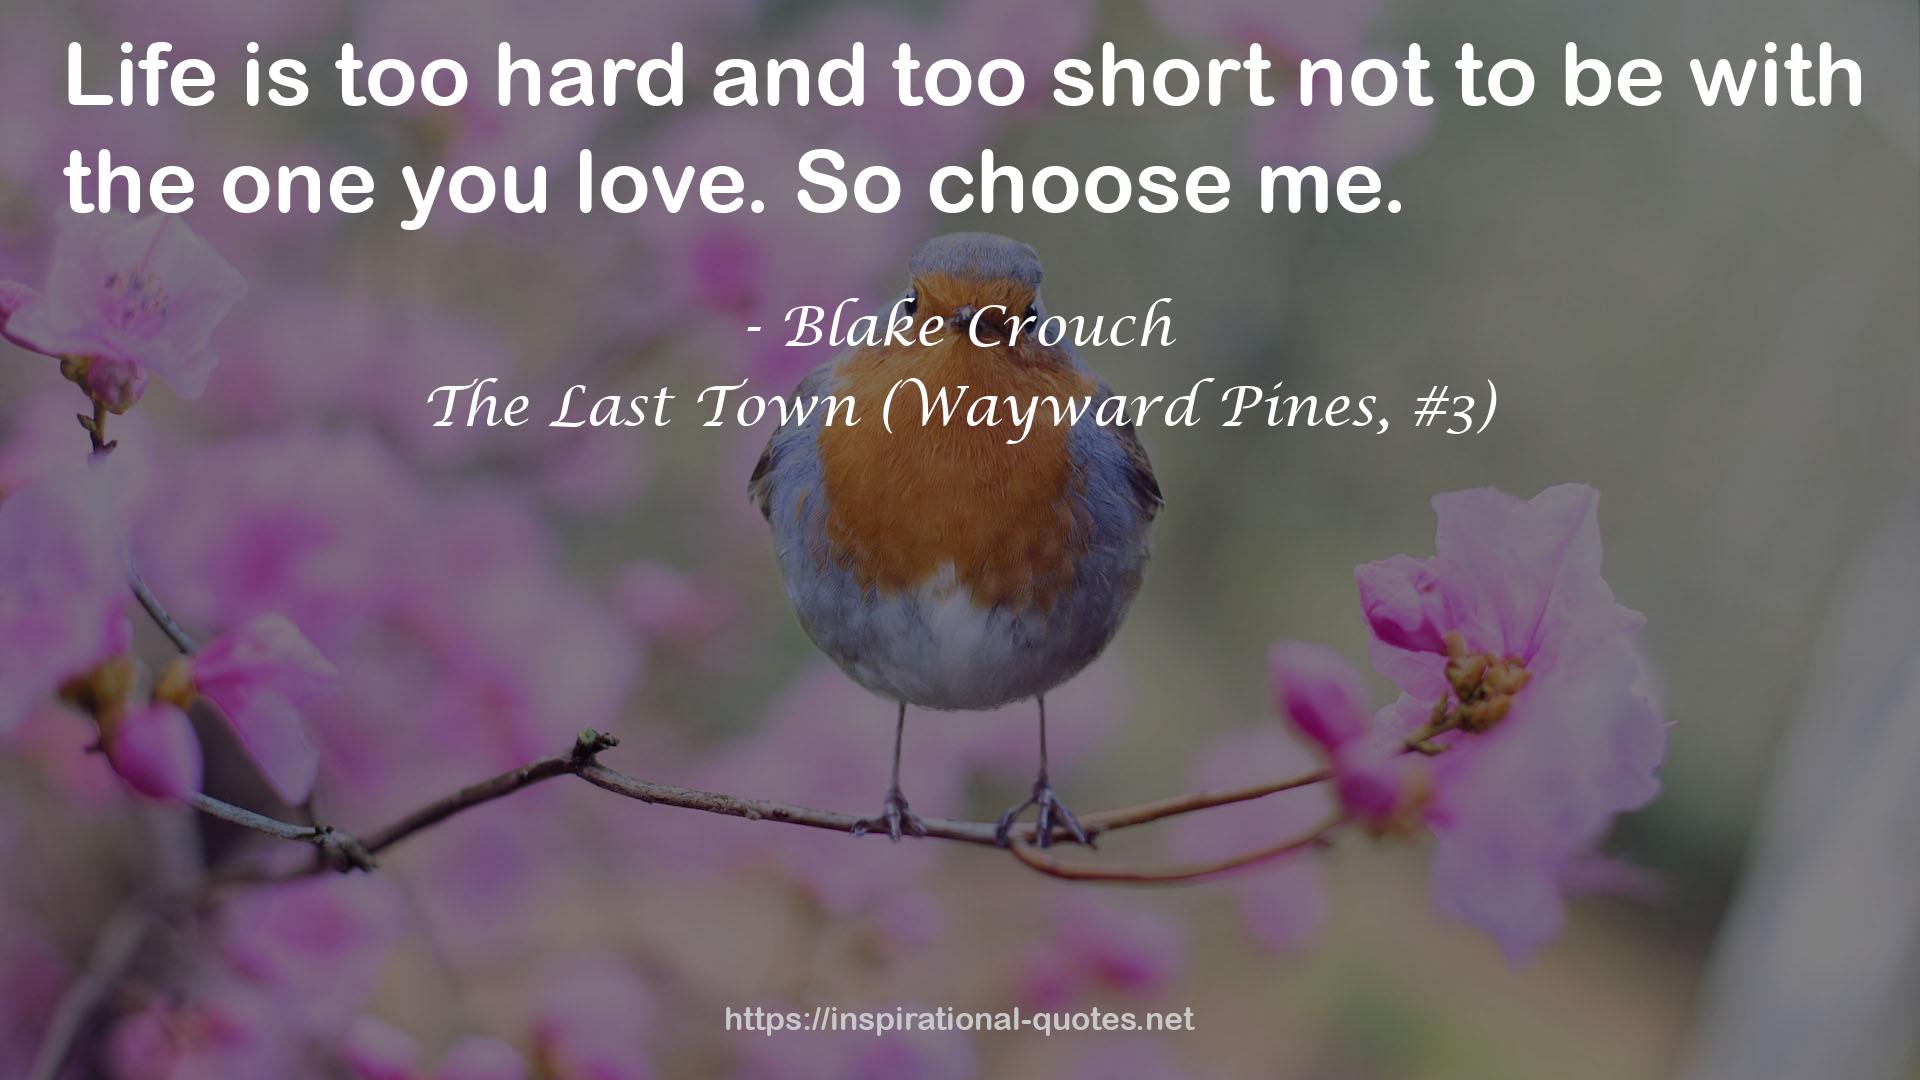 The Last Town (Wayward Pines, #3) QUOTES